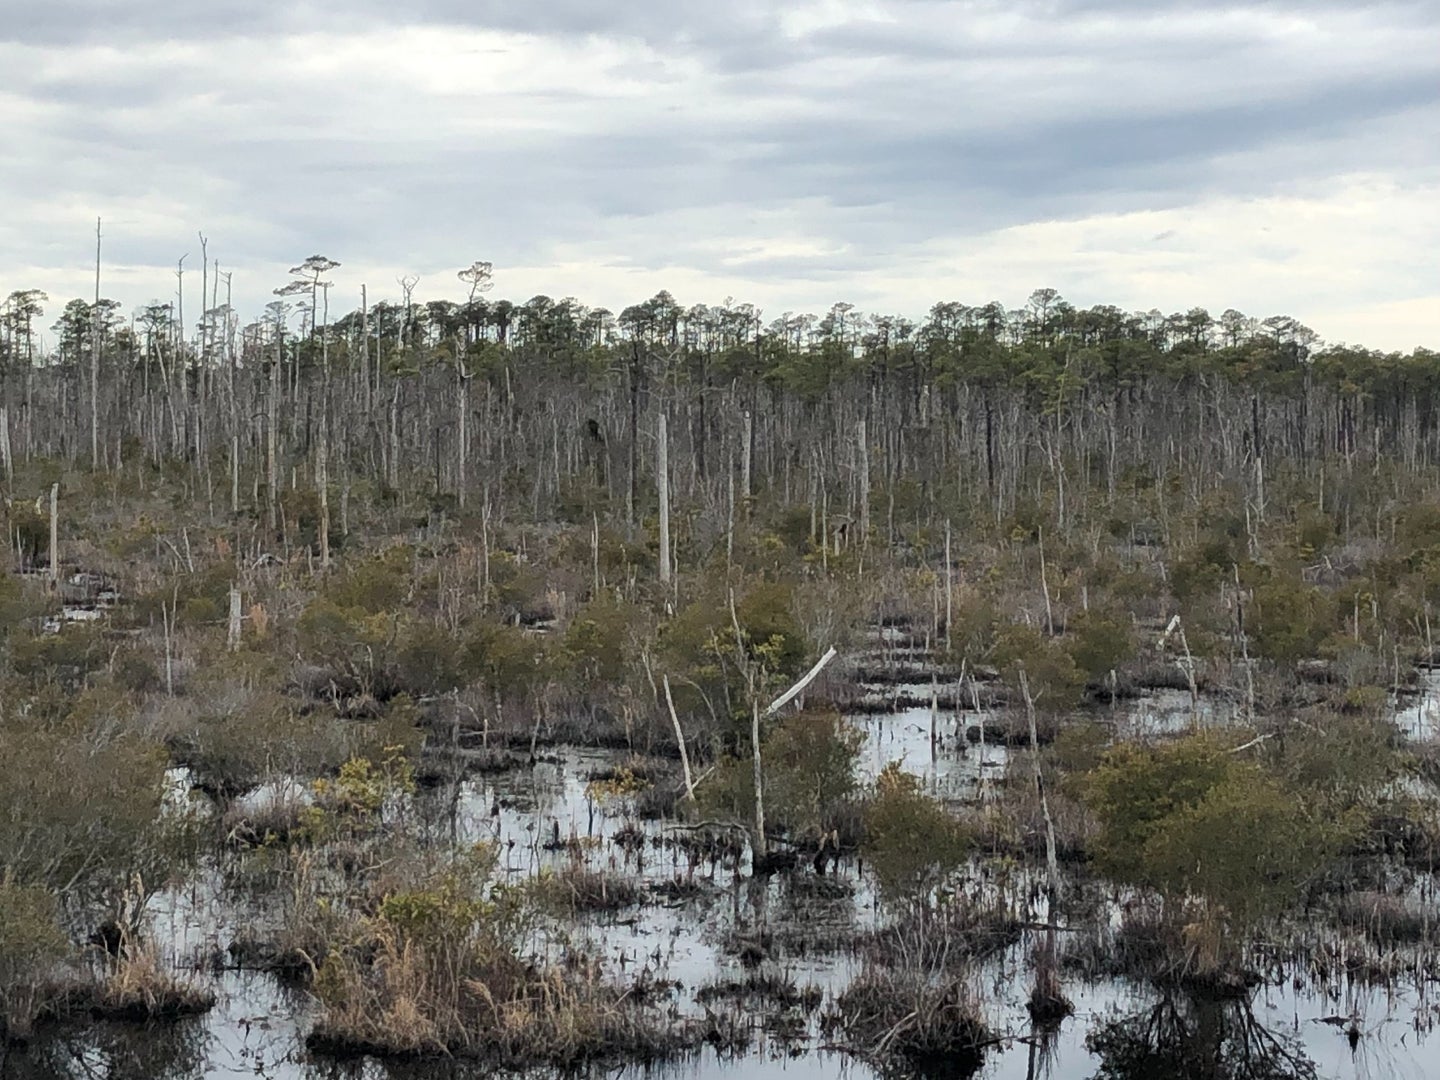 Using satellite images from the U.S. Geological Survey, researchers found that between 1985 and 2019, up to 11 percent of the area once covered by forest had deteriorated into “ghost forests." 